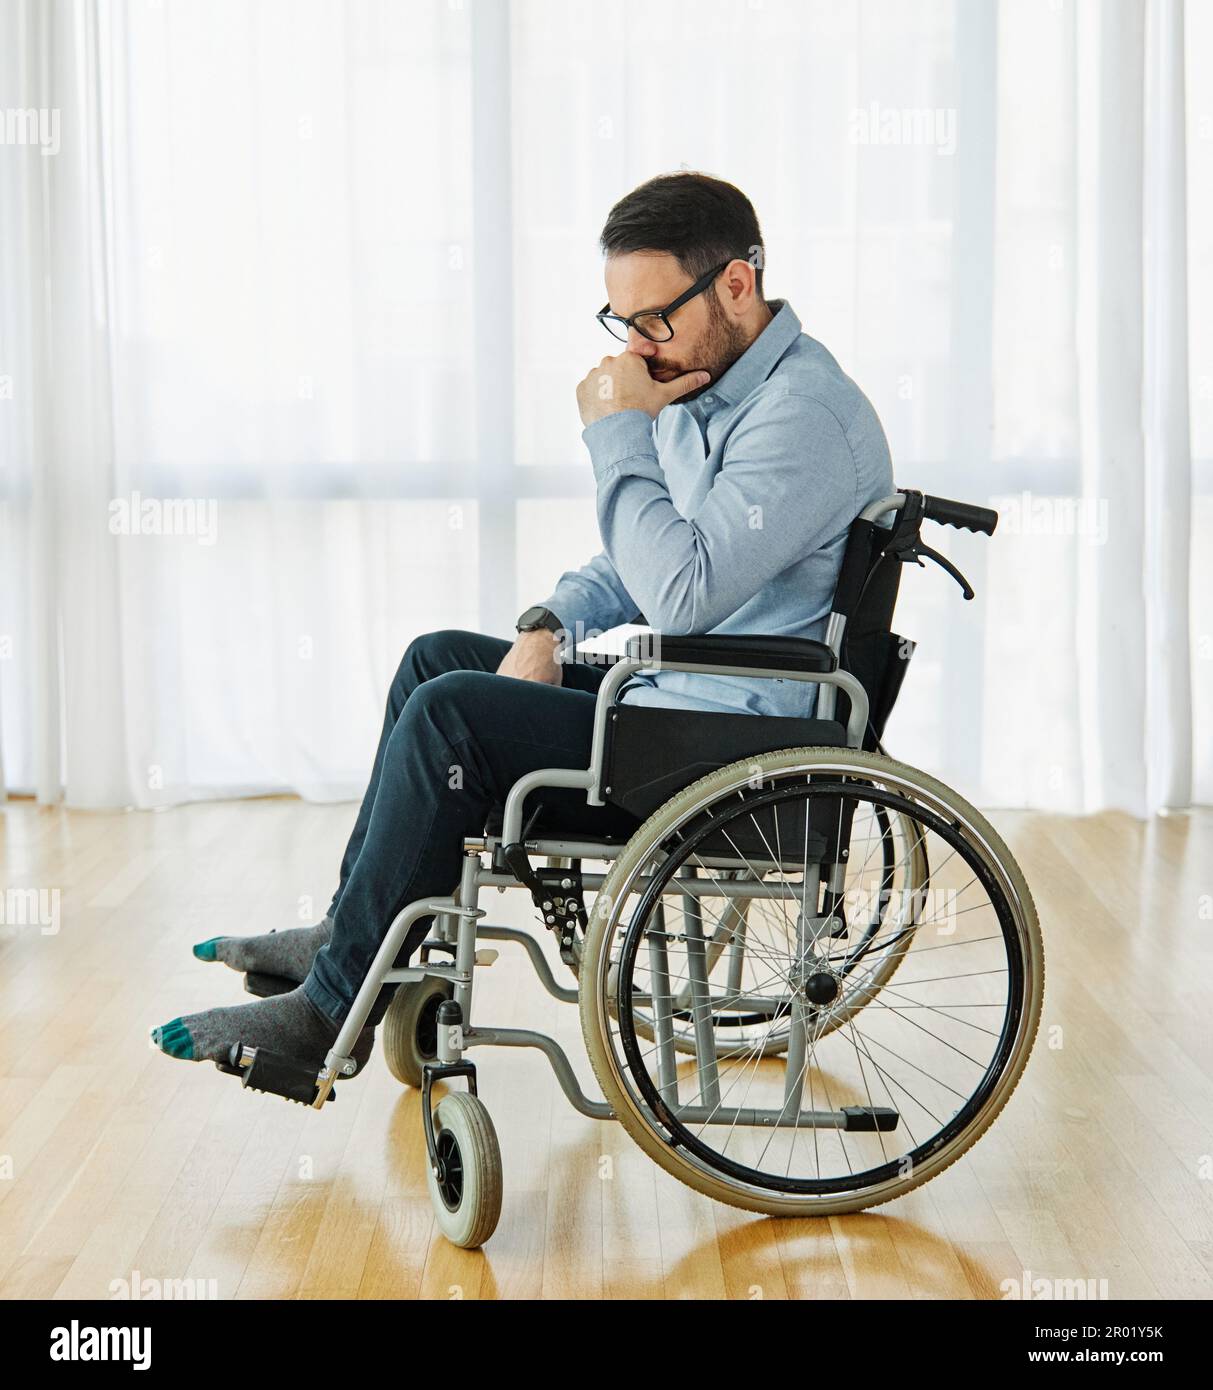 disability wheelchair disabled man handicap sitting handicapped health young wheel care invalid depressed lonely sad alone solitude worried Stock Photo